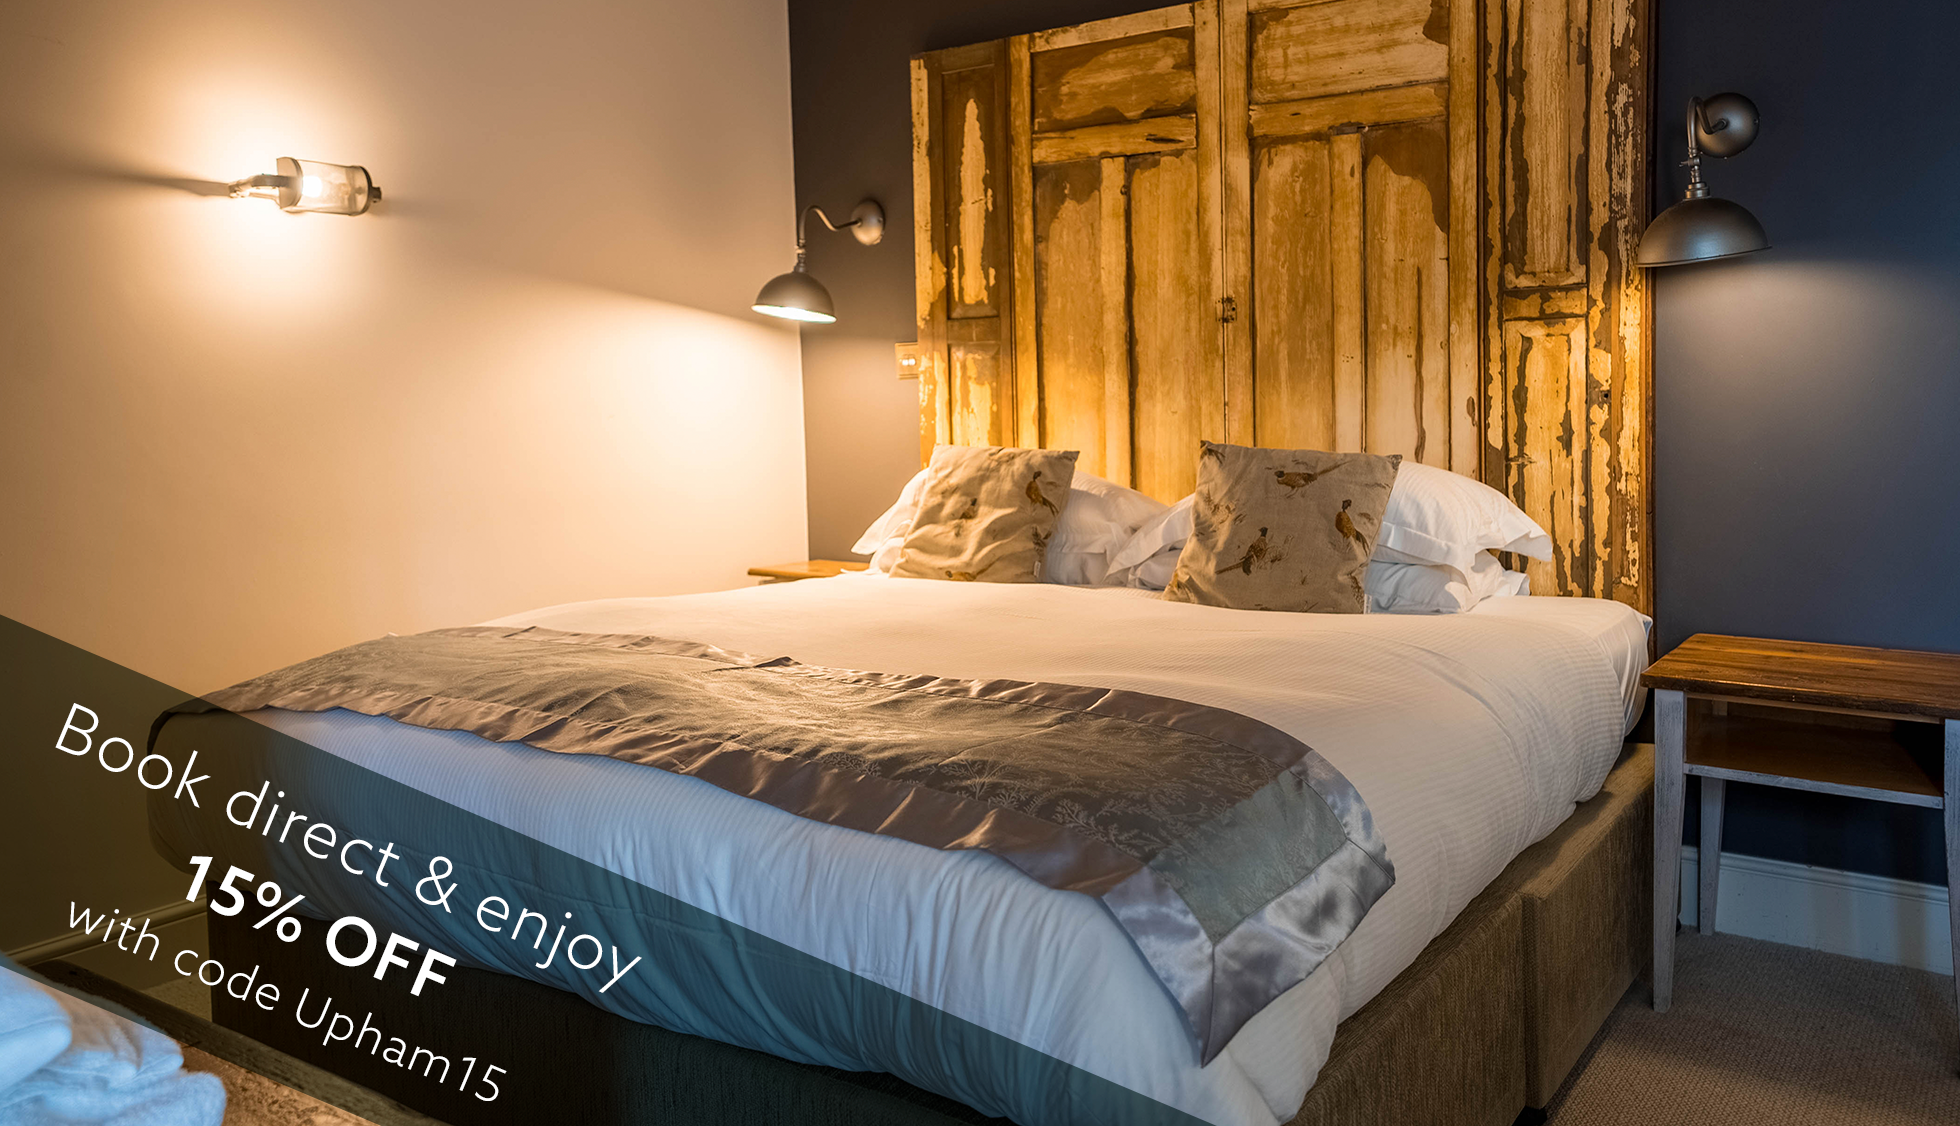 The Bunk Inn Book Direct 15% off with Code Upham 15